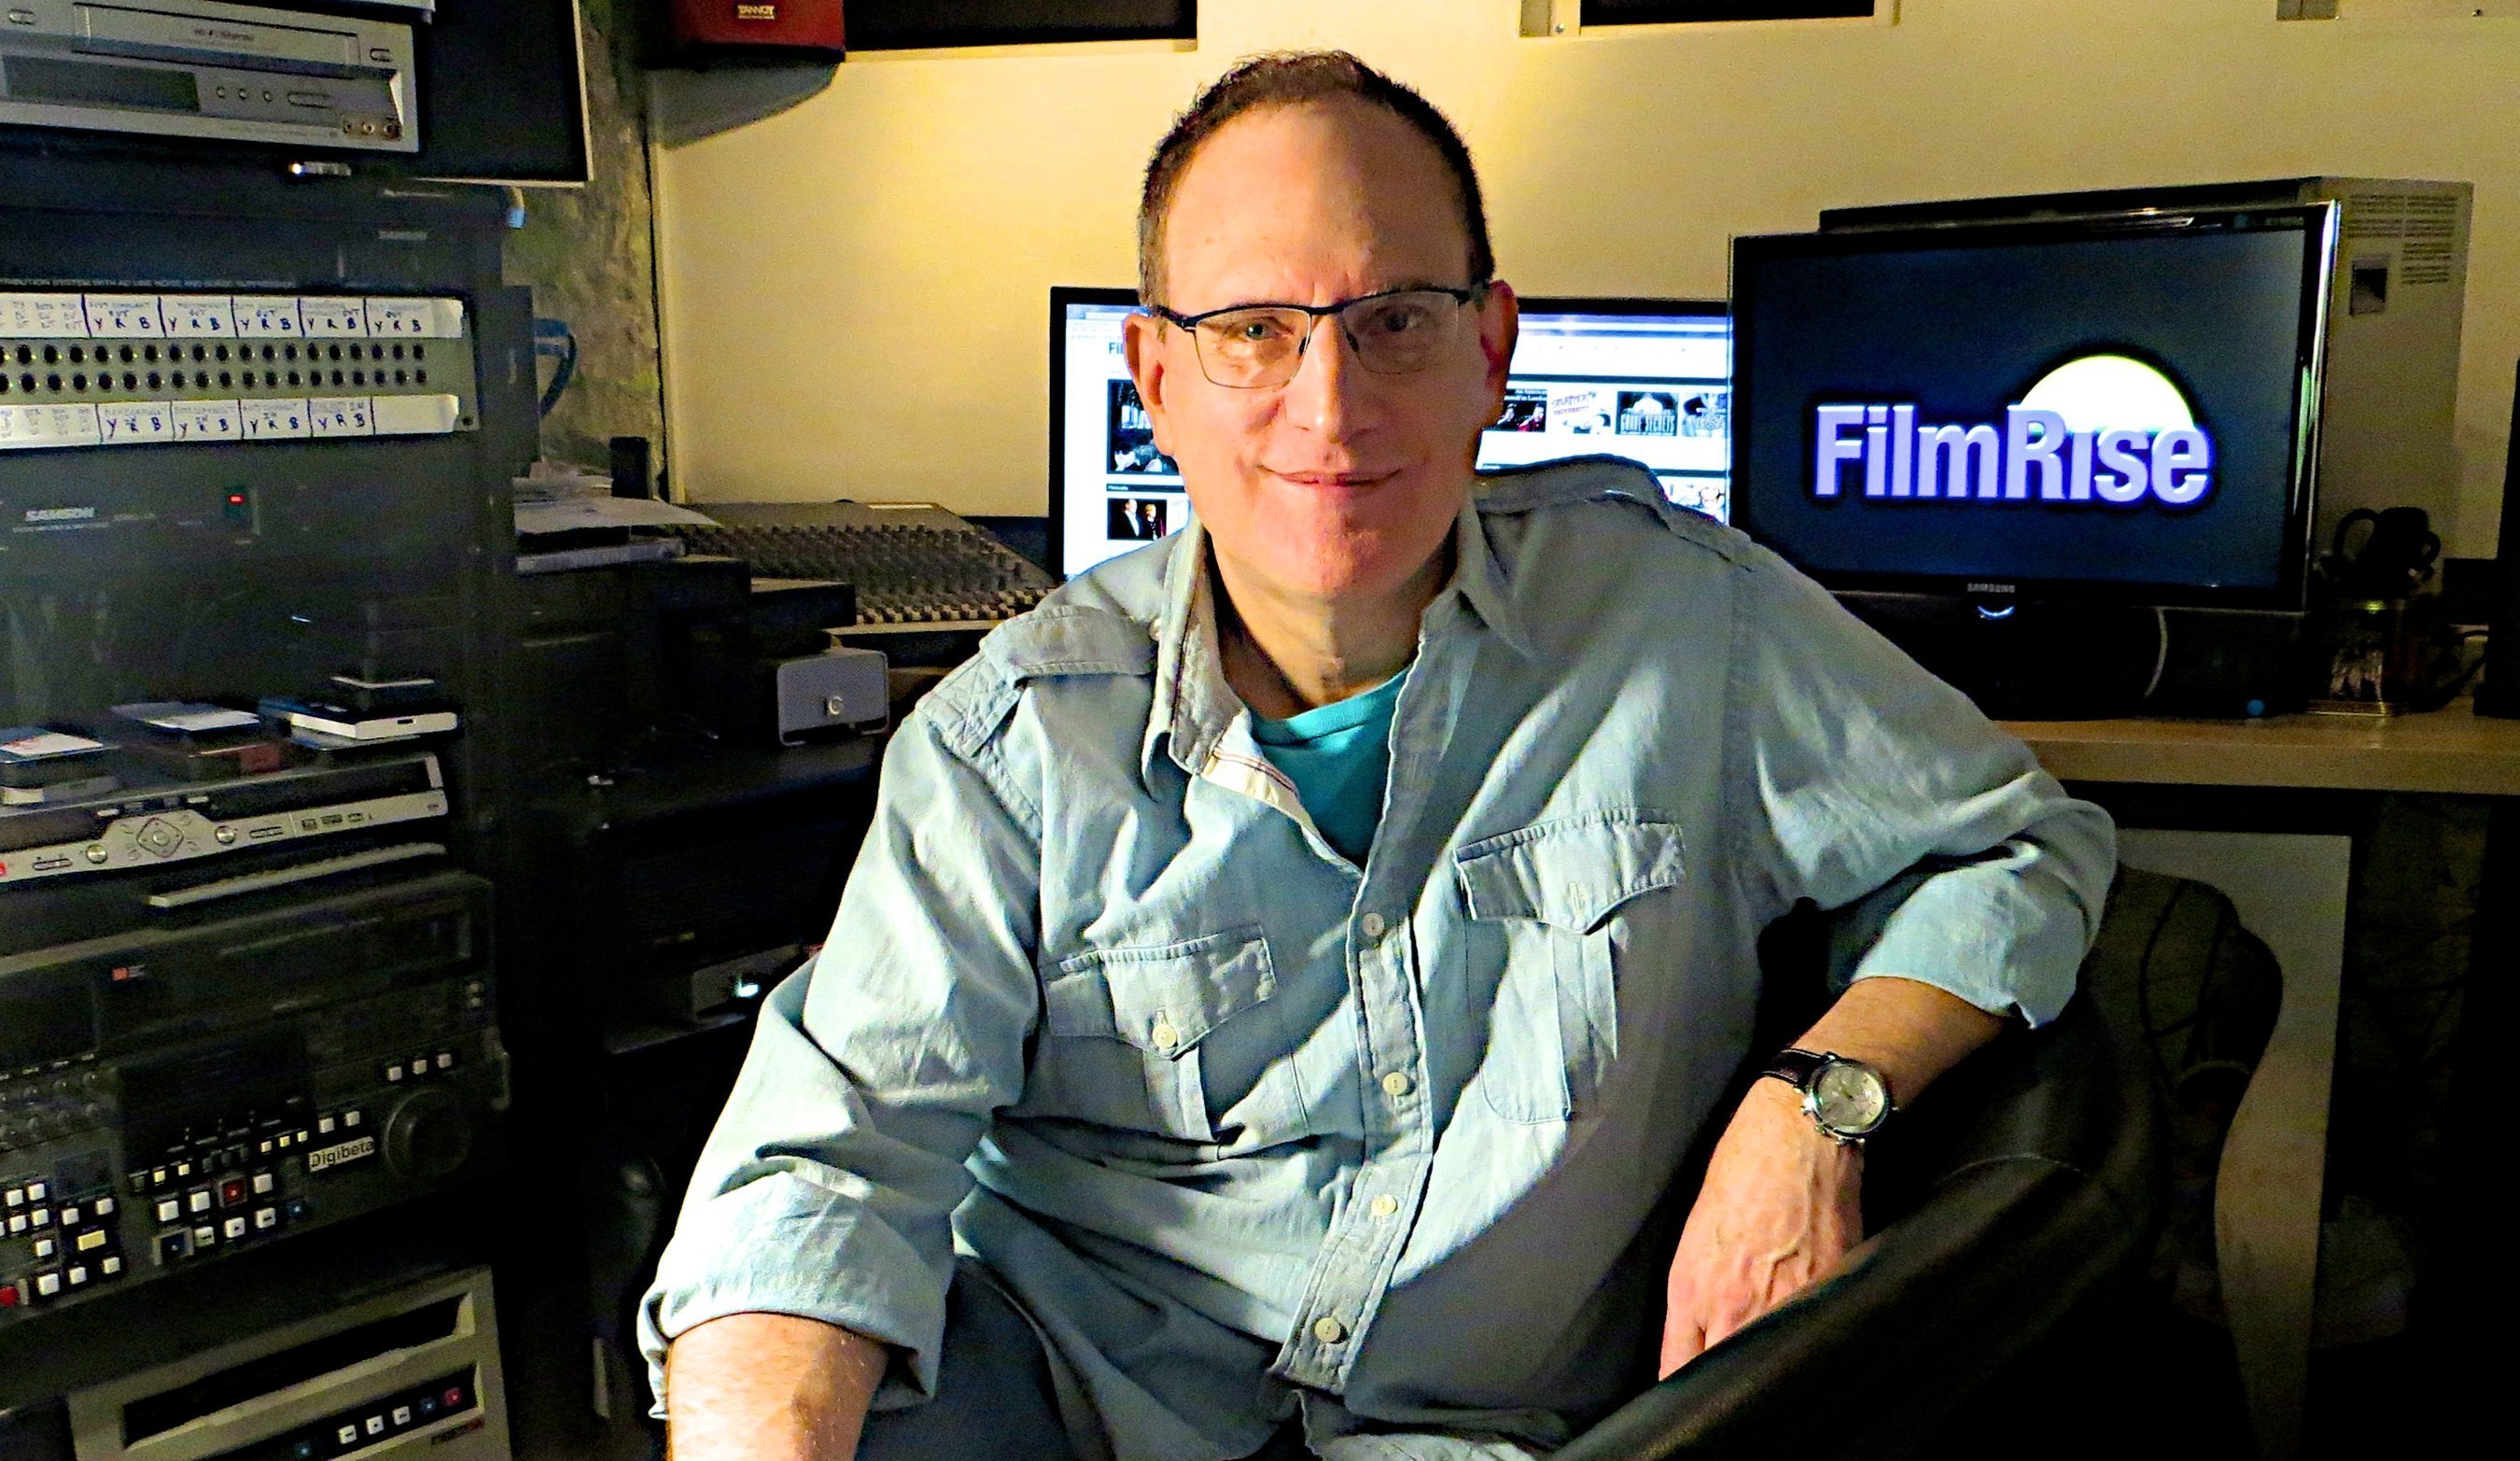 FilmRise CEO, Danny Fisher